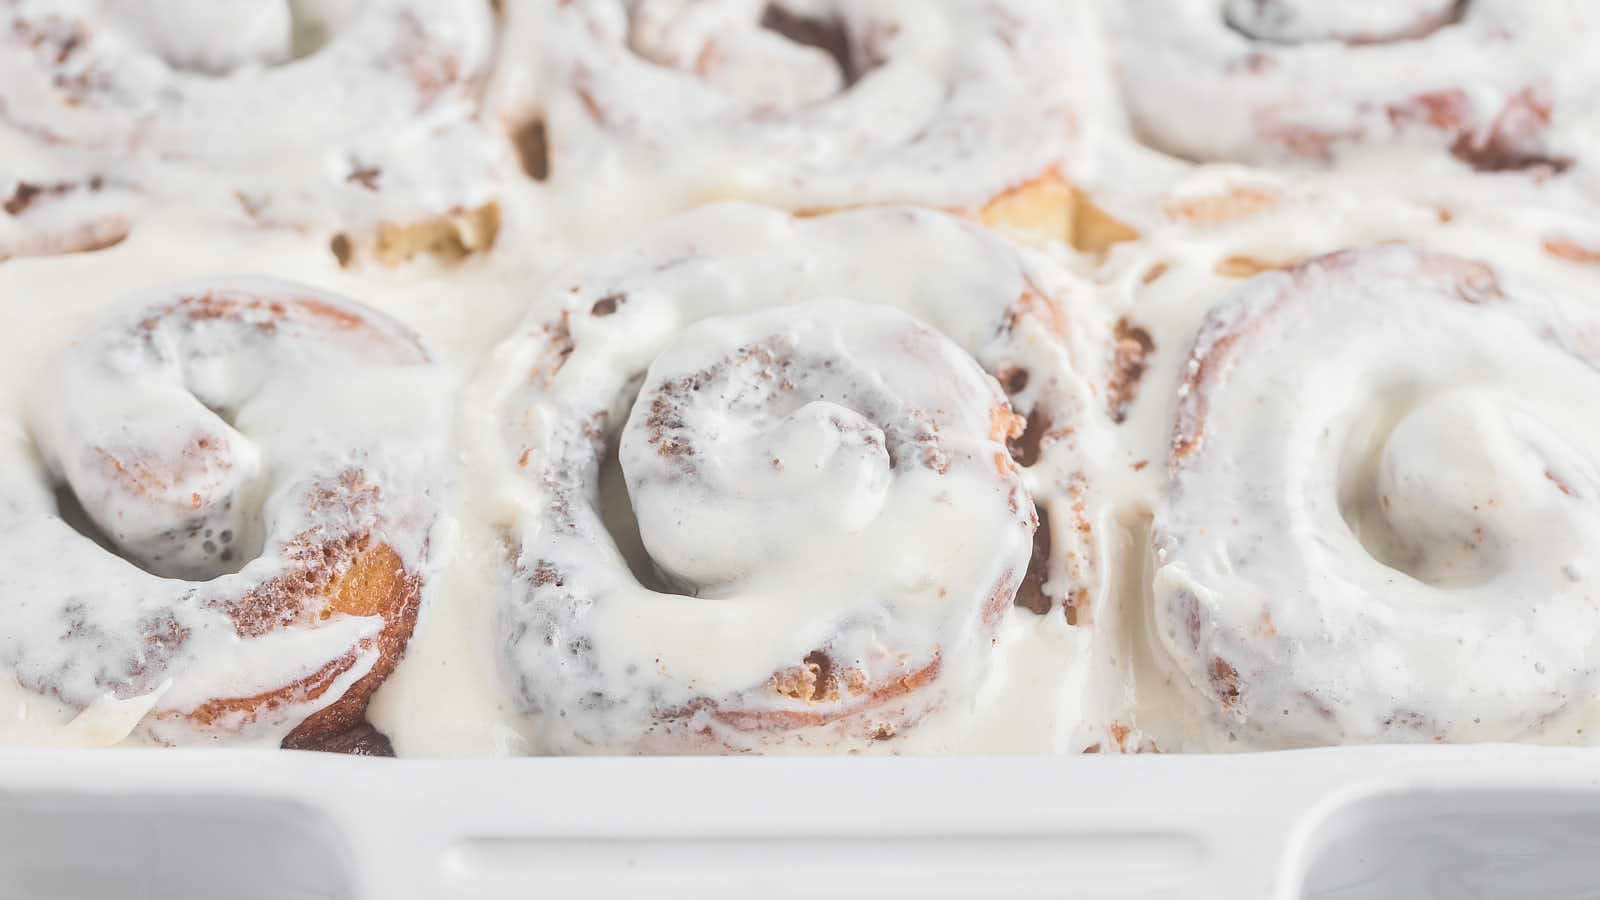 Delicious Cinnamon Rolls in a white dish with icing.